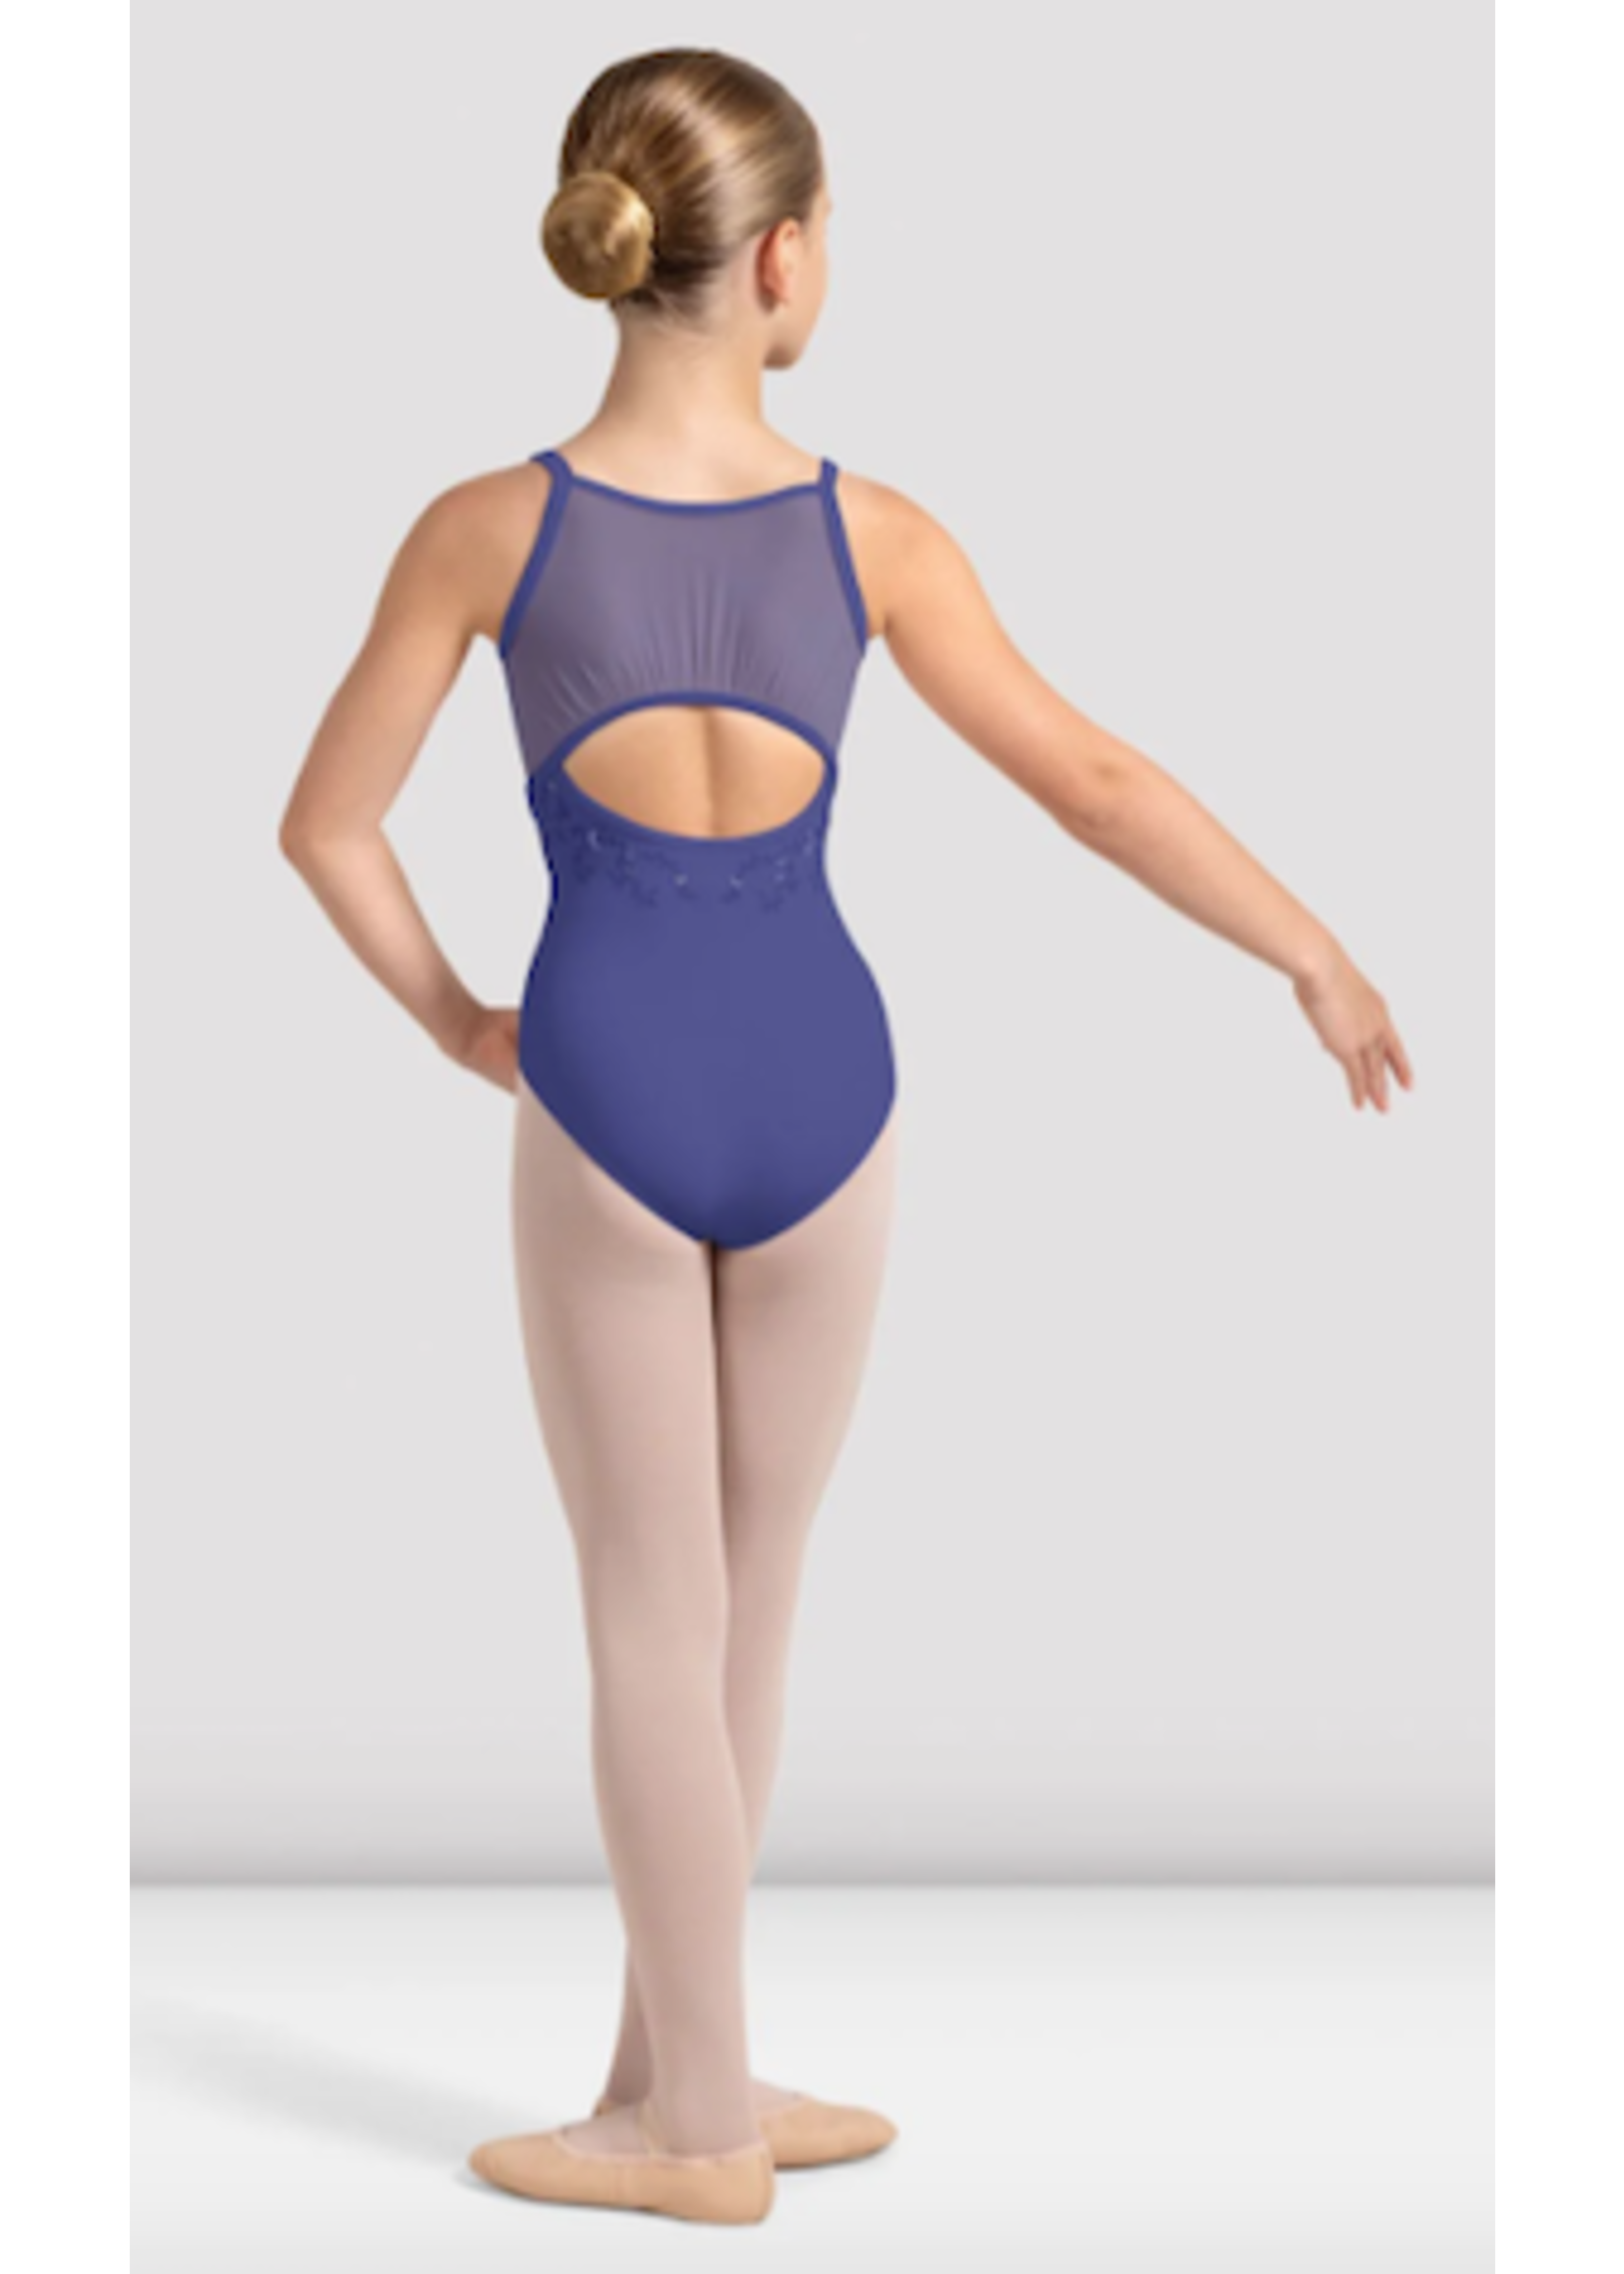 BLOCH & MIRELLA CL4227 EMBROIDERED SIDE MESH ROUCHED CIRCLE BACK CAMISOLE LEOTARD